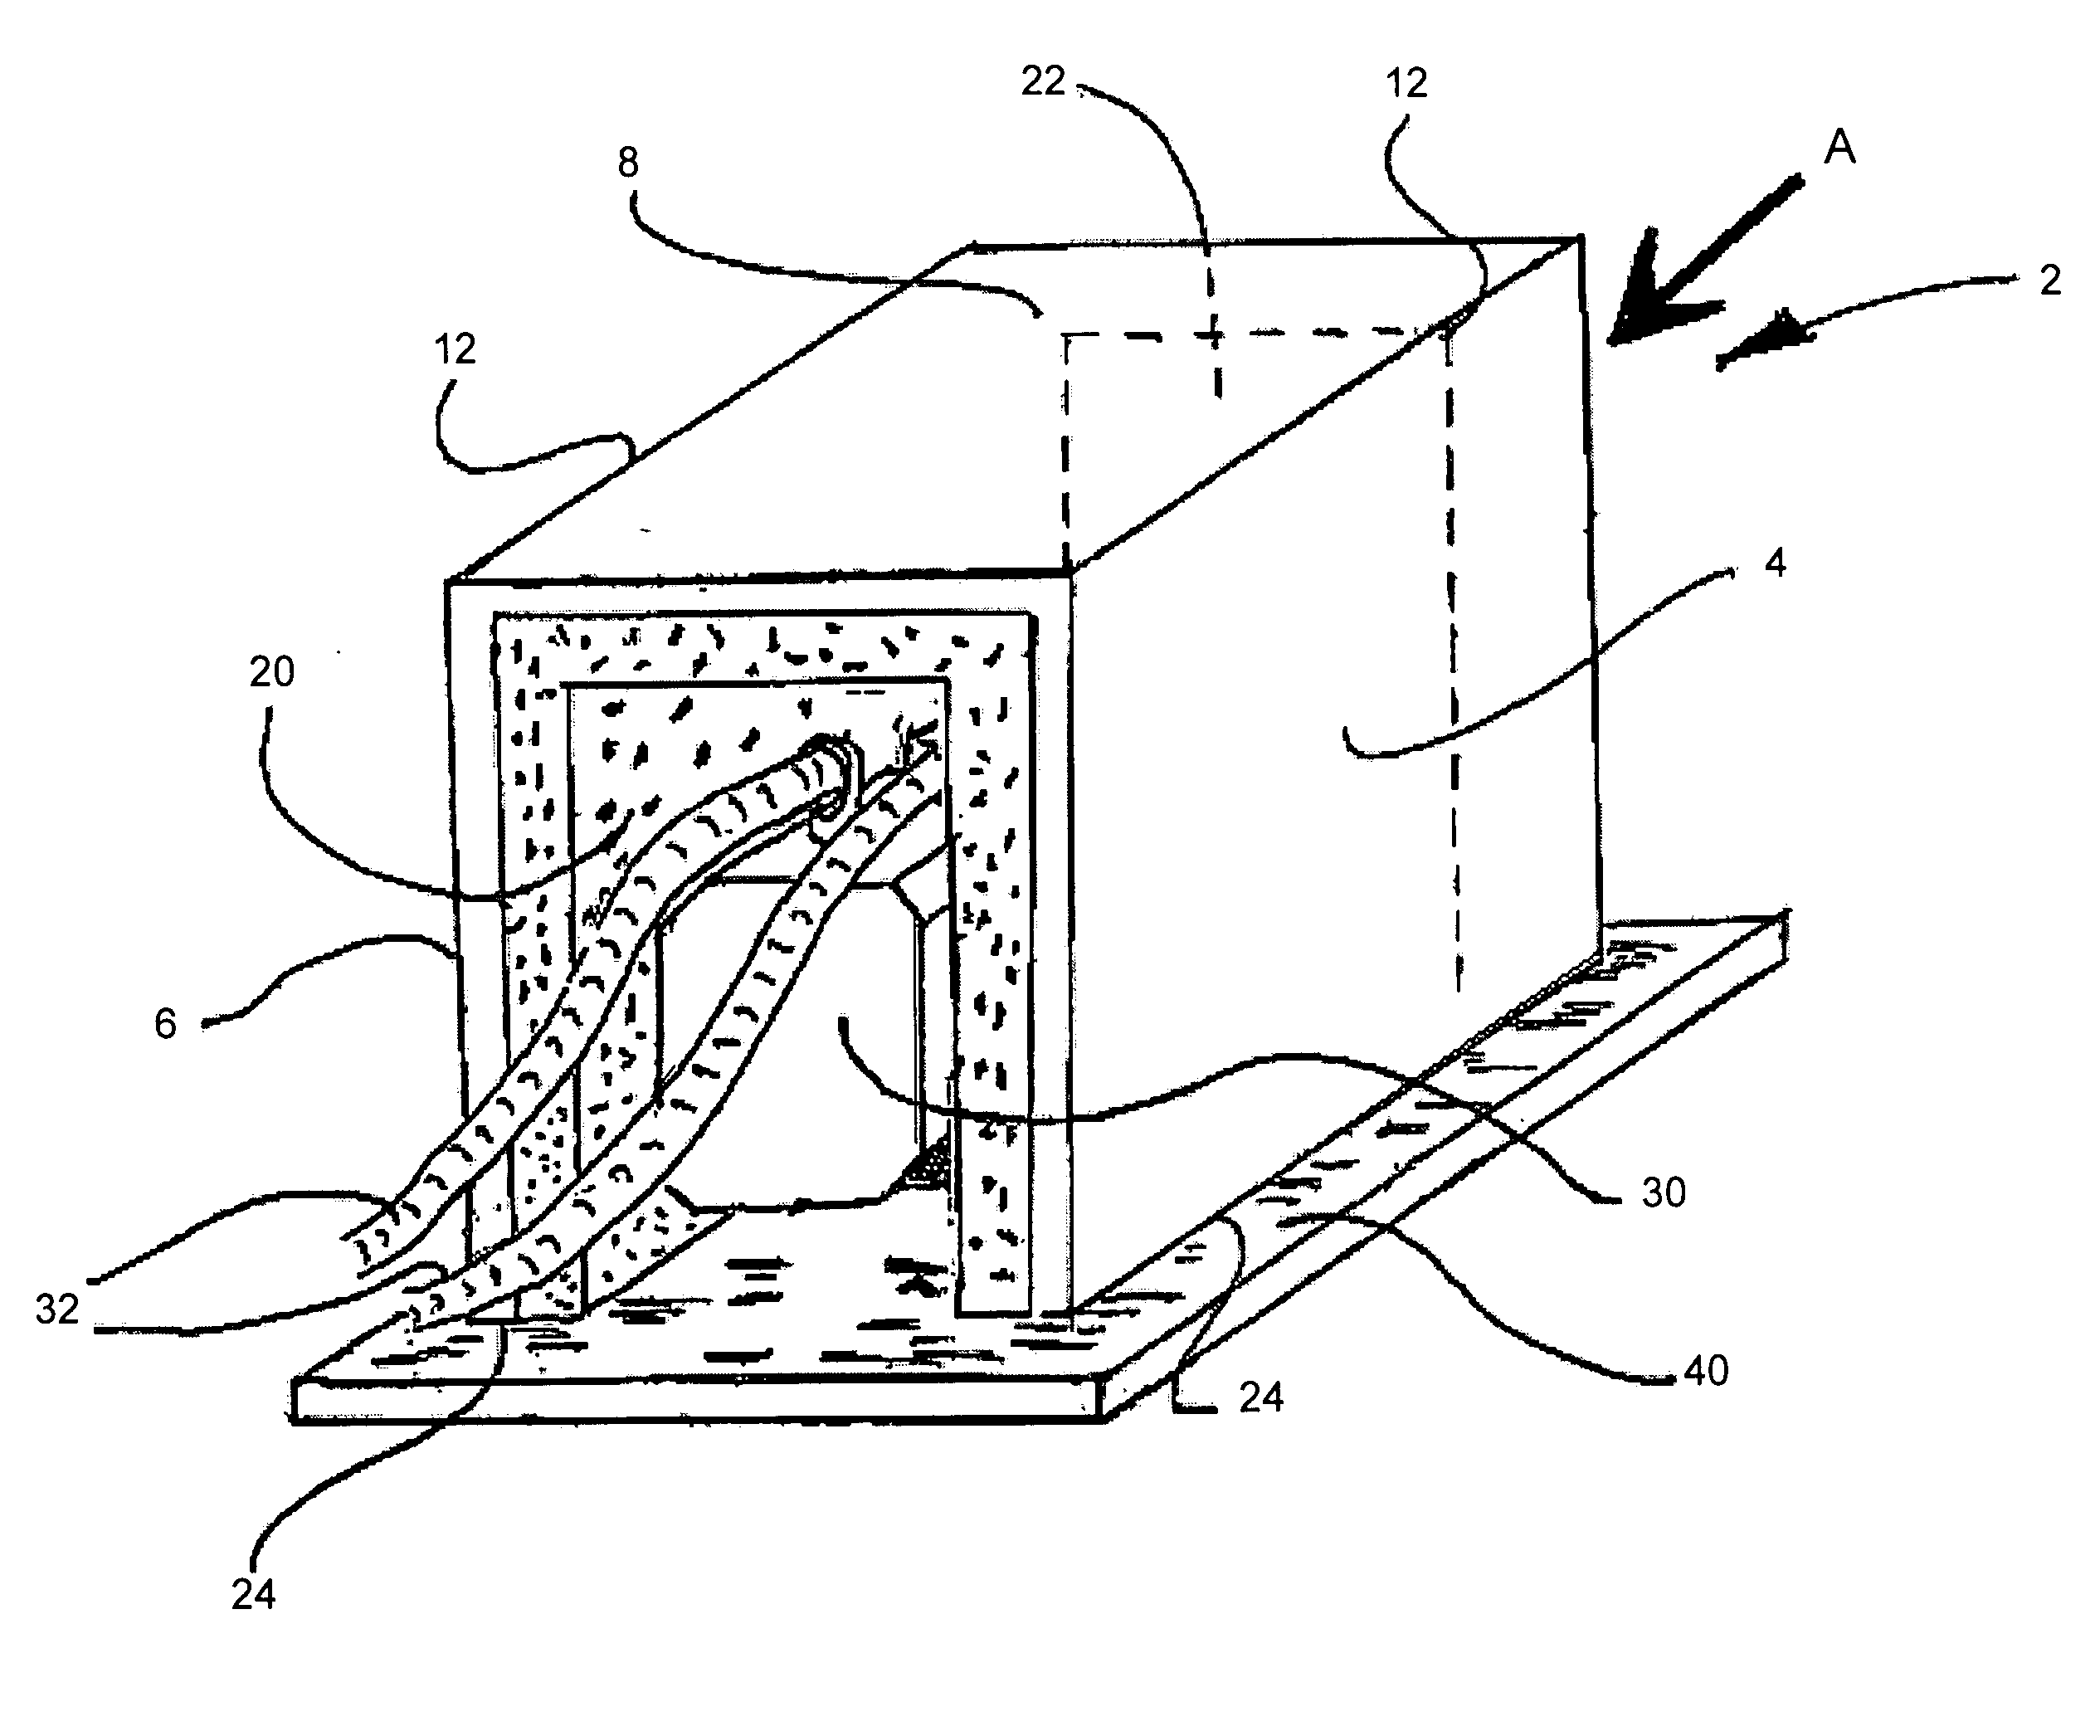 Enclosure,assembly and method for reducing noise from a pump and mass spectrometry system